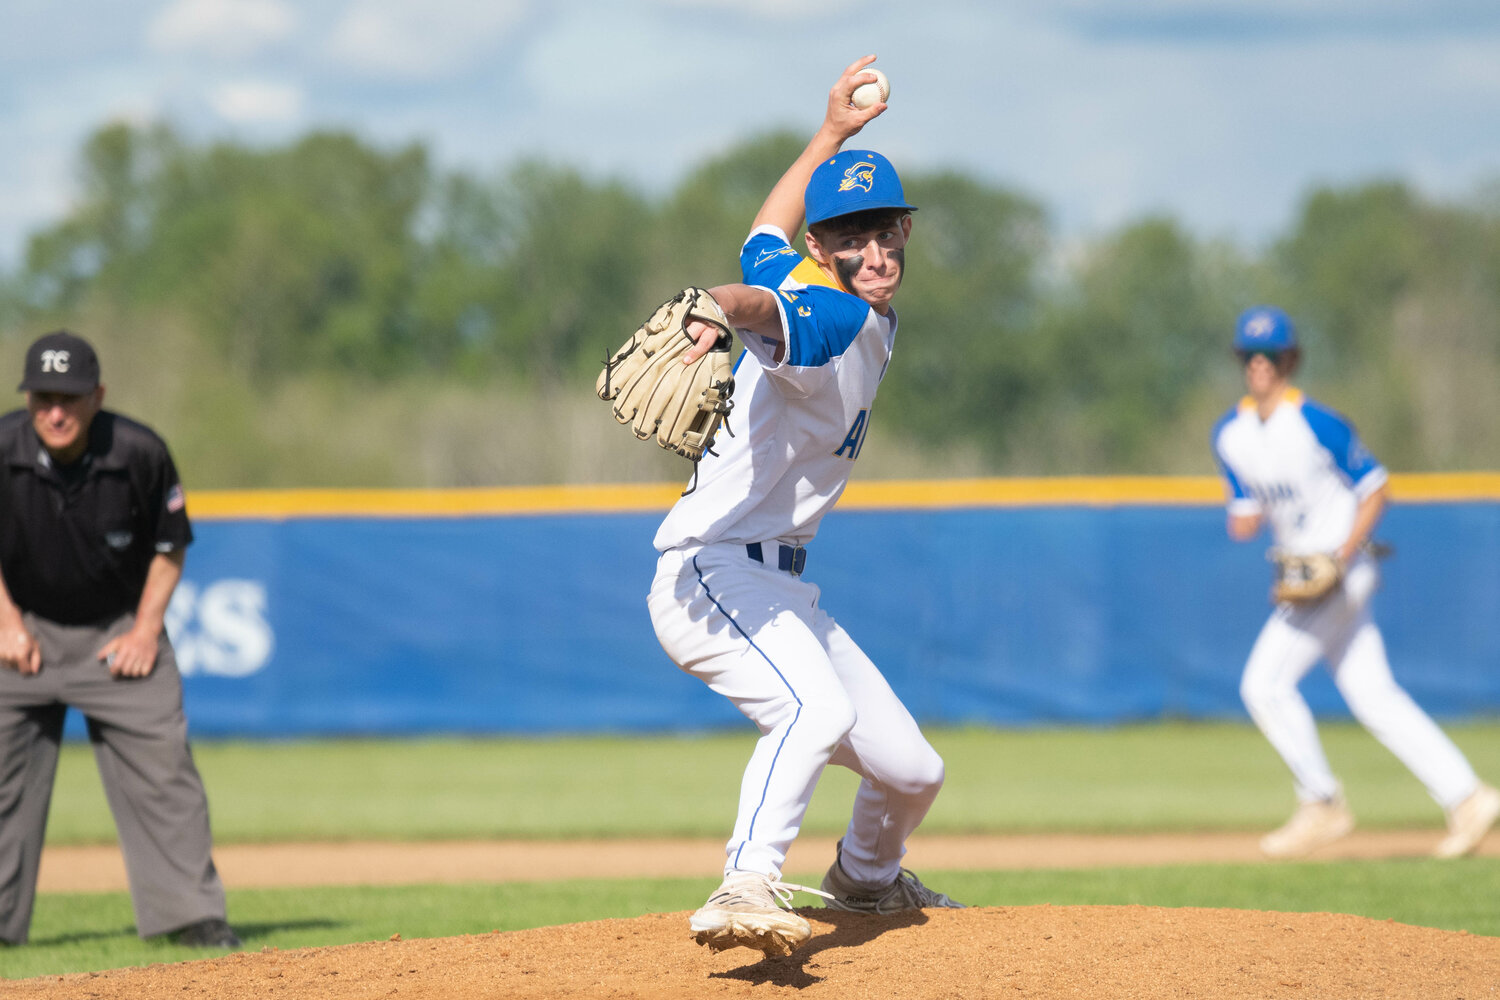 Cameron Nakano throws a pitch during Adna's 15-5 loss to Toutle Lake in the 2B District 4 tournament semifinals, in Adna on May 9.